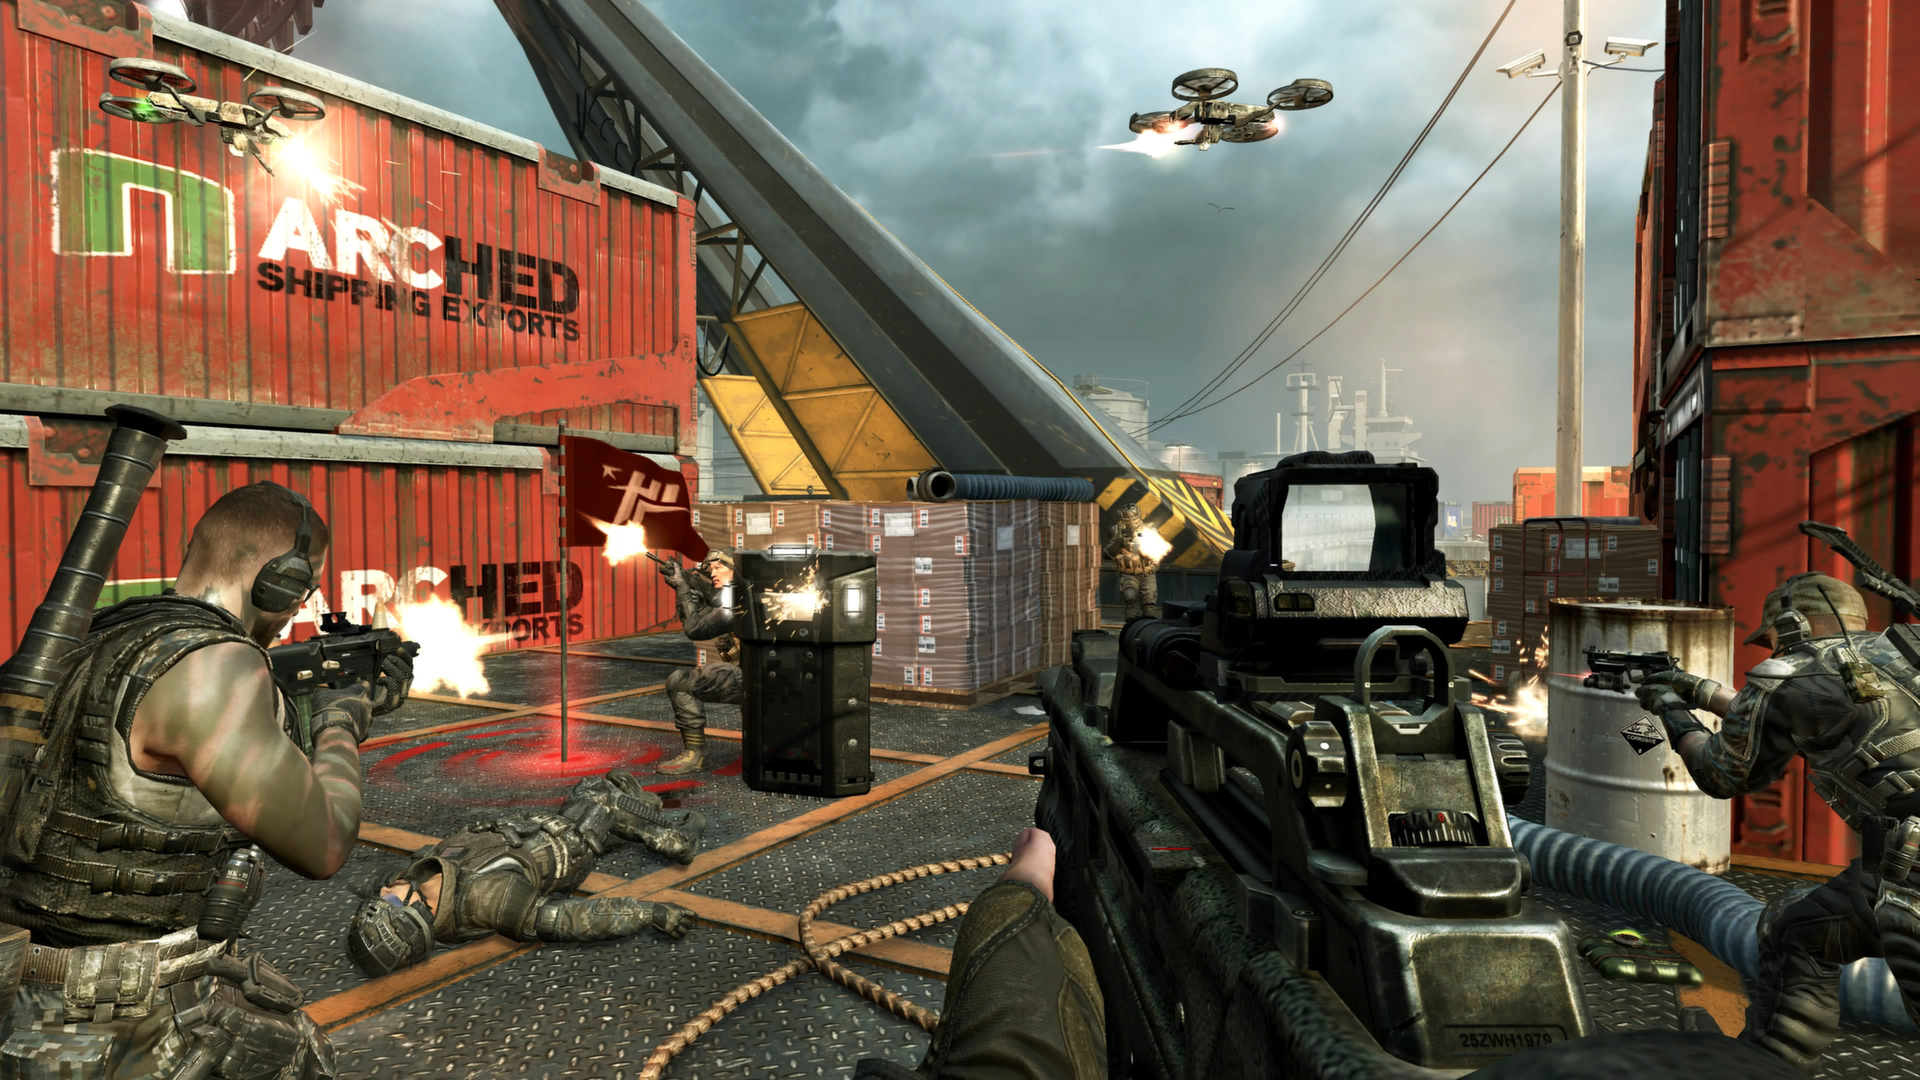 call of duty black ops 2 multiplayer pc